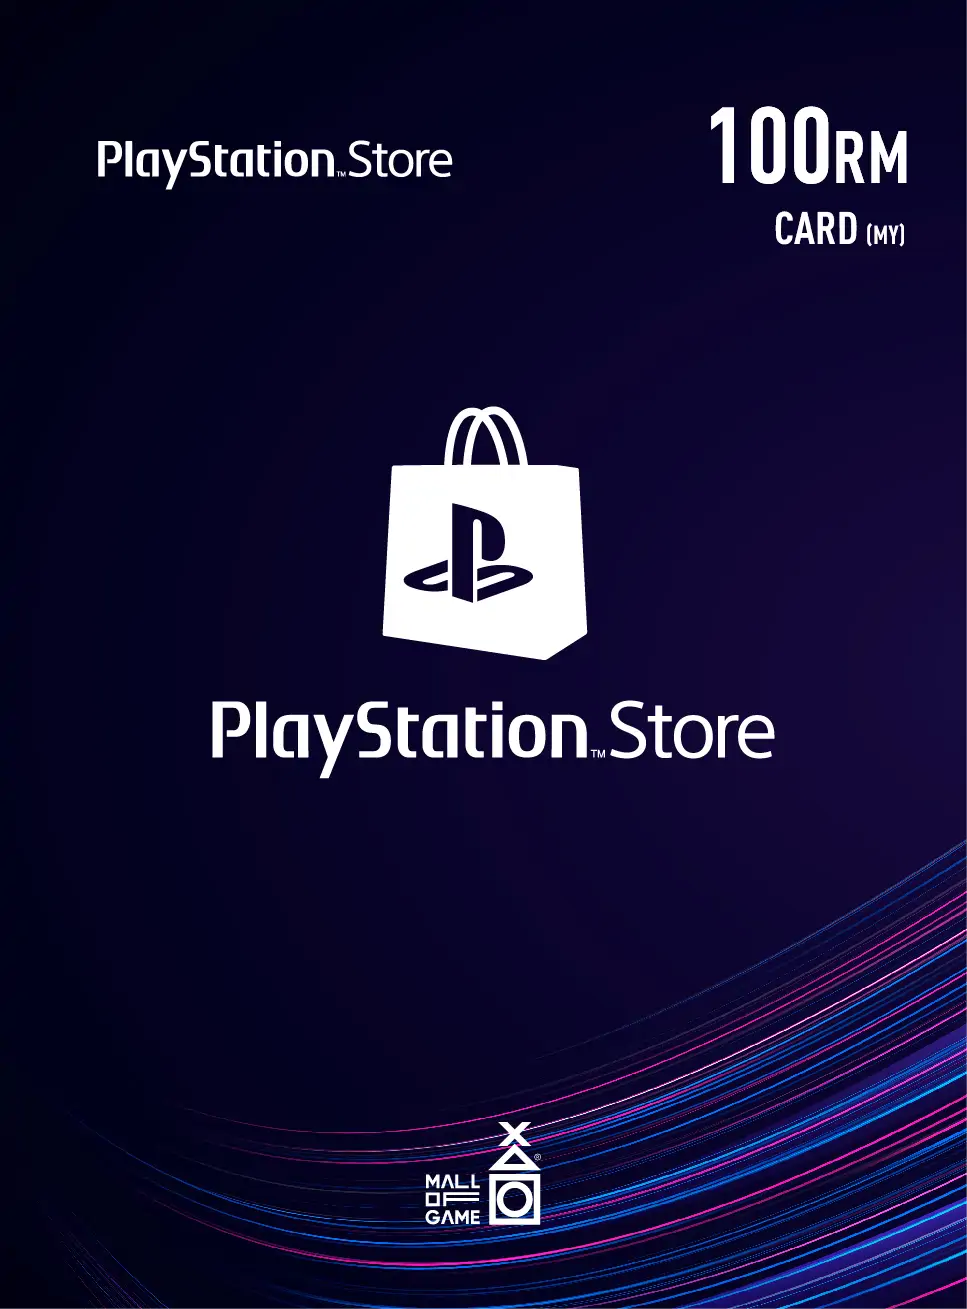 PlayStation™Store RM100 Cards (MY)